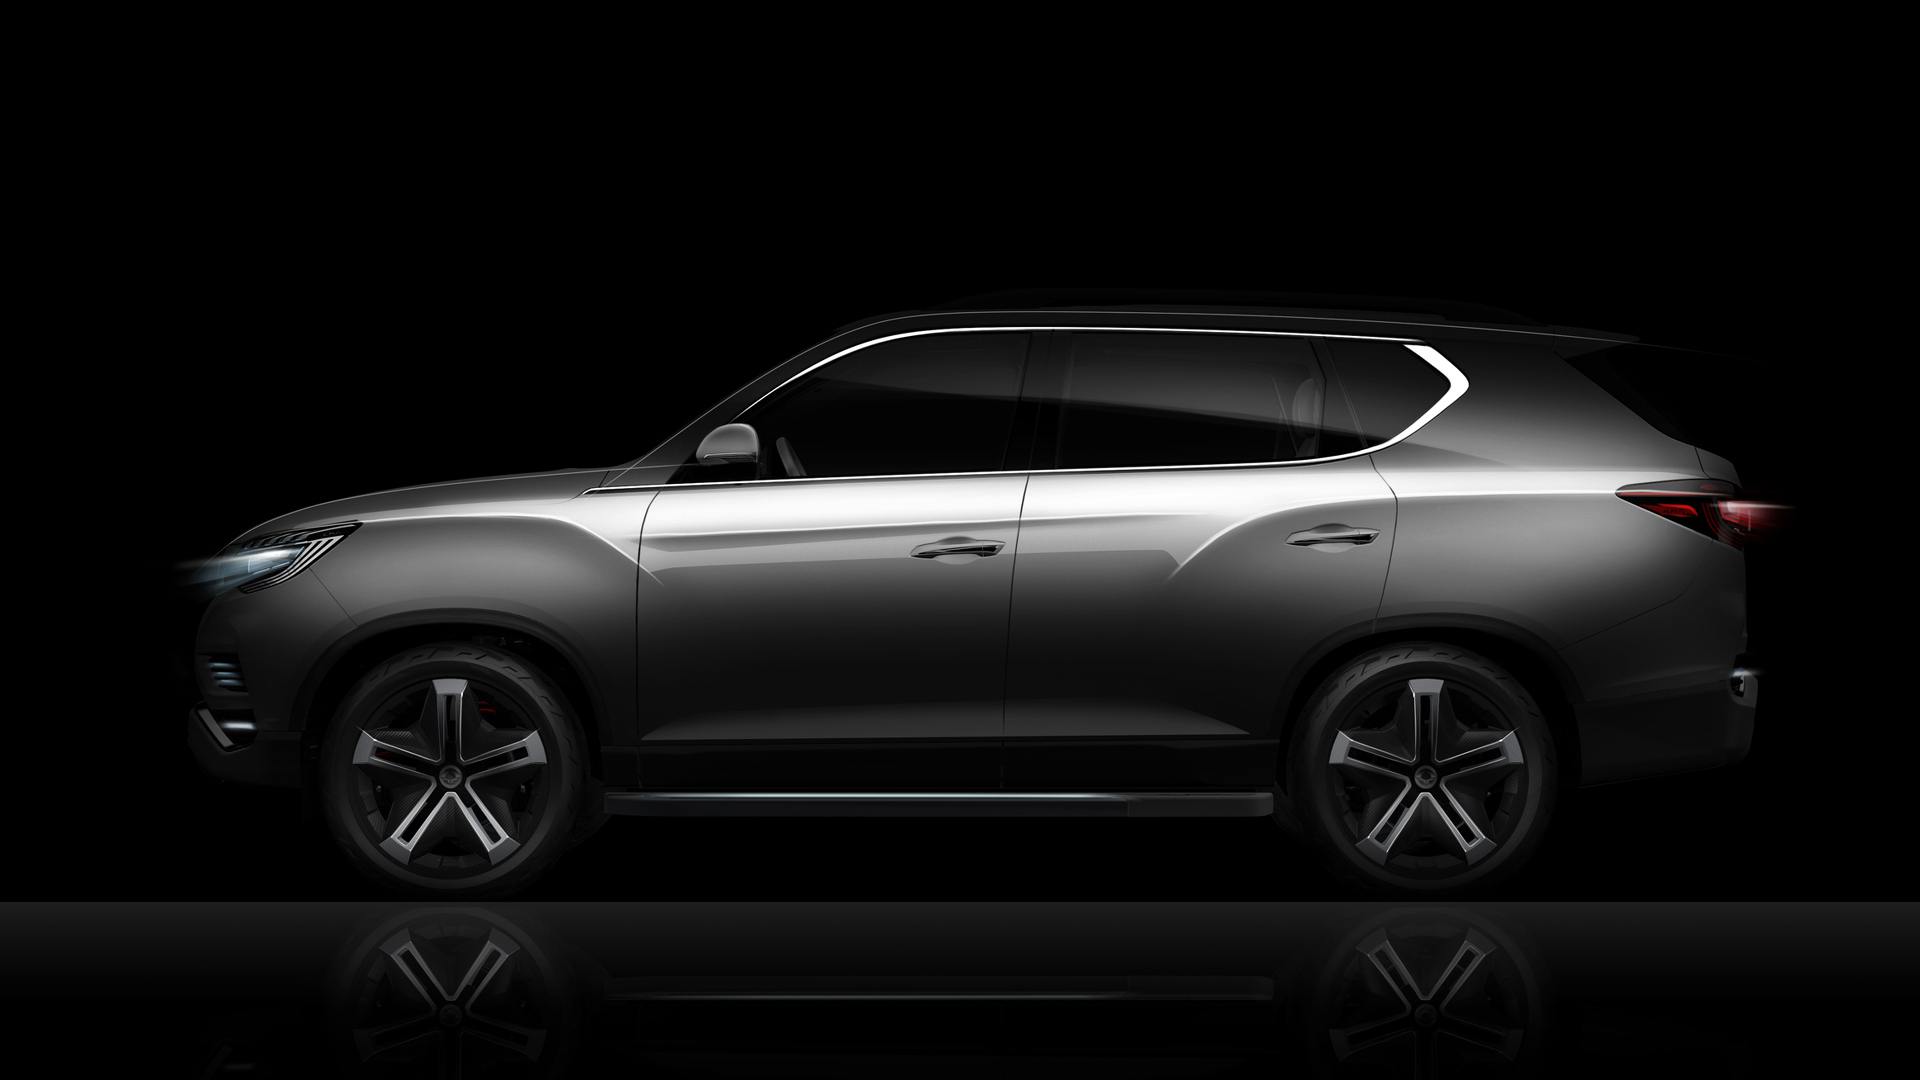 SsangYong LIV-2 SUV concept previewed before Paris